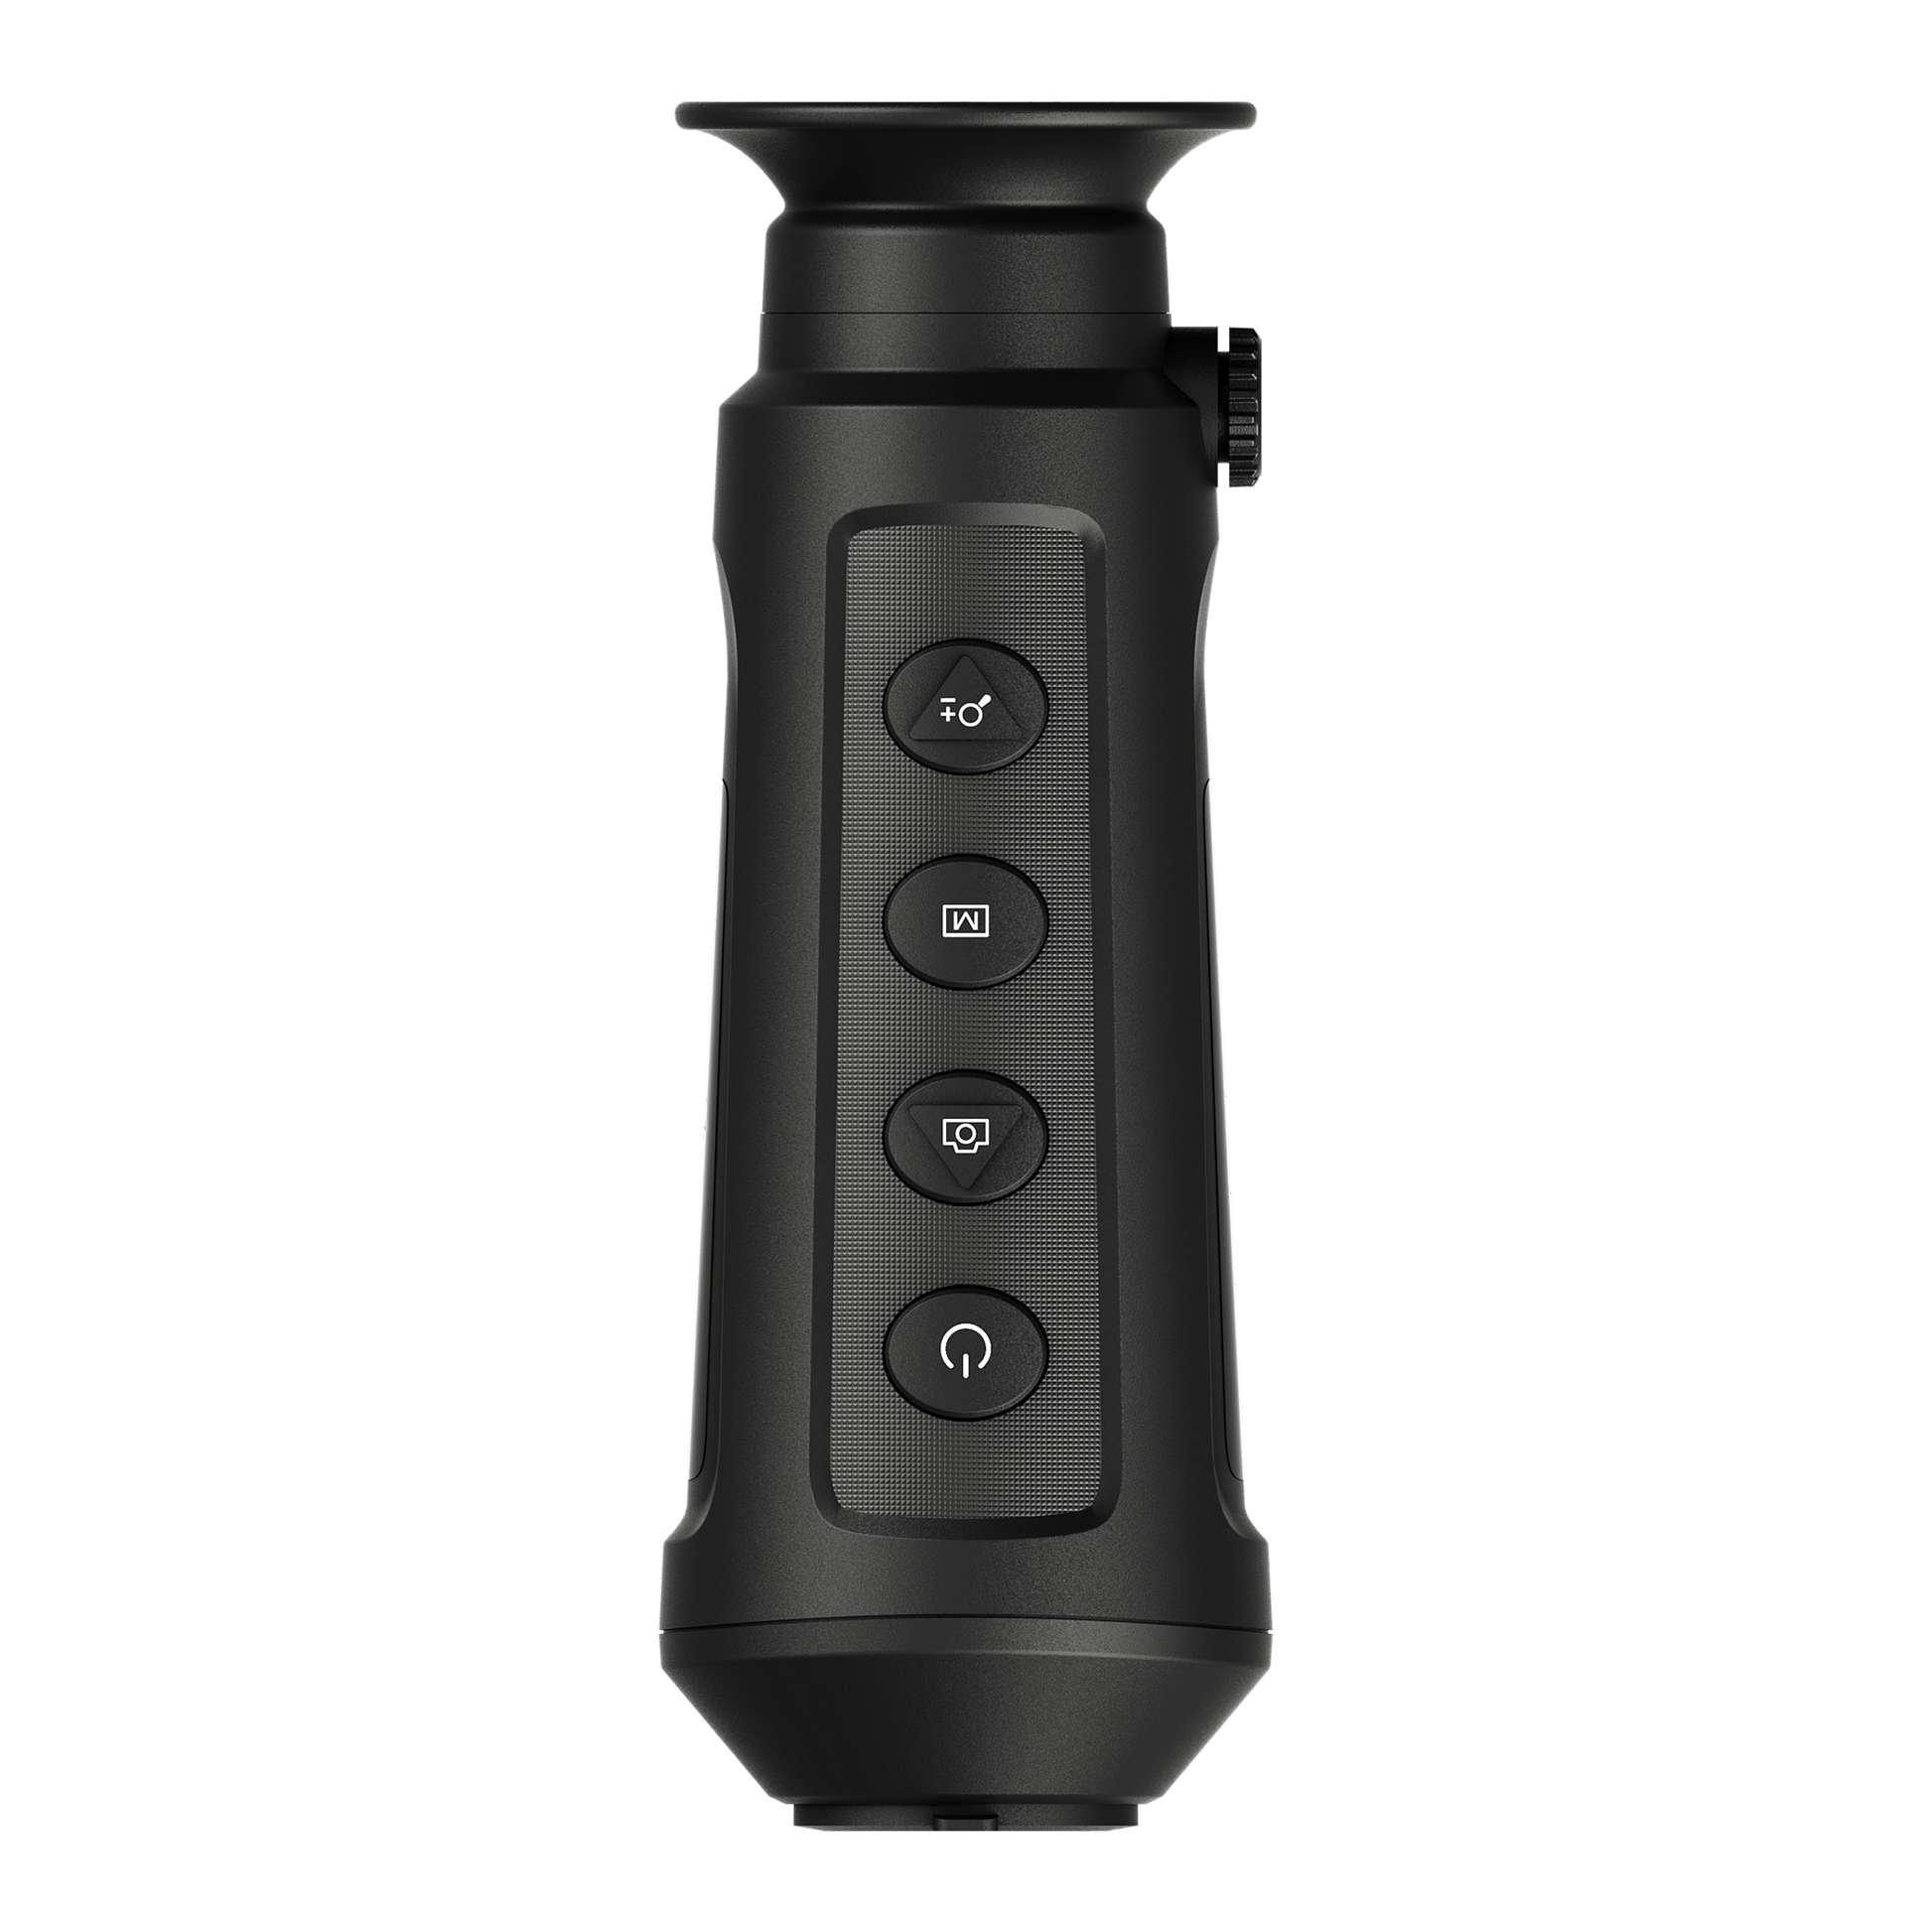 Lynx Pro LE10S Thermal Monocular top view showing easy-to-use navigation buttons